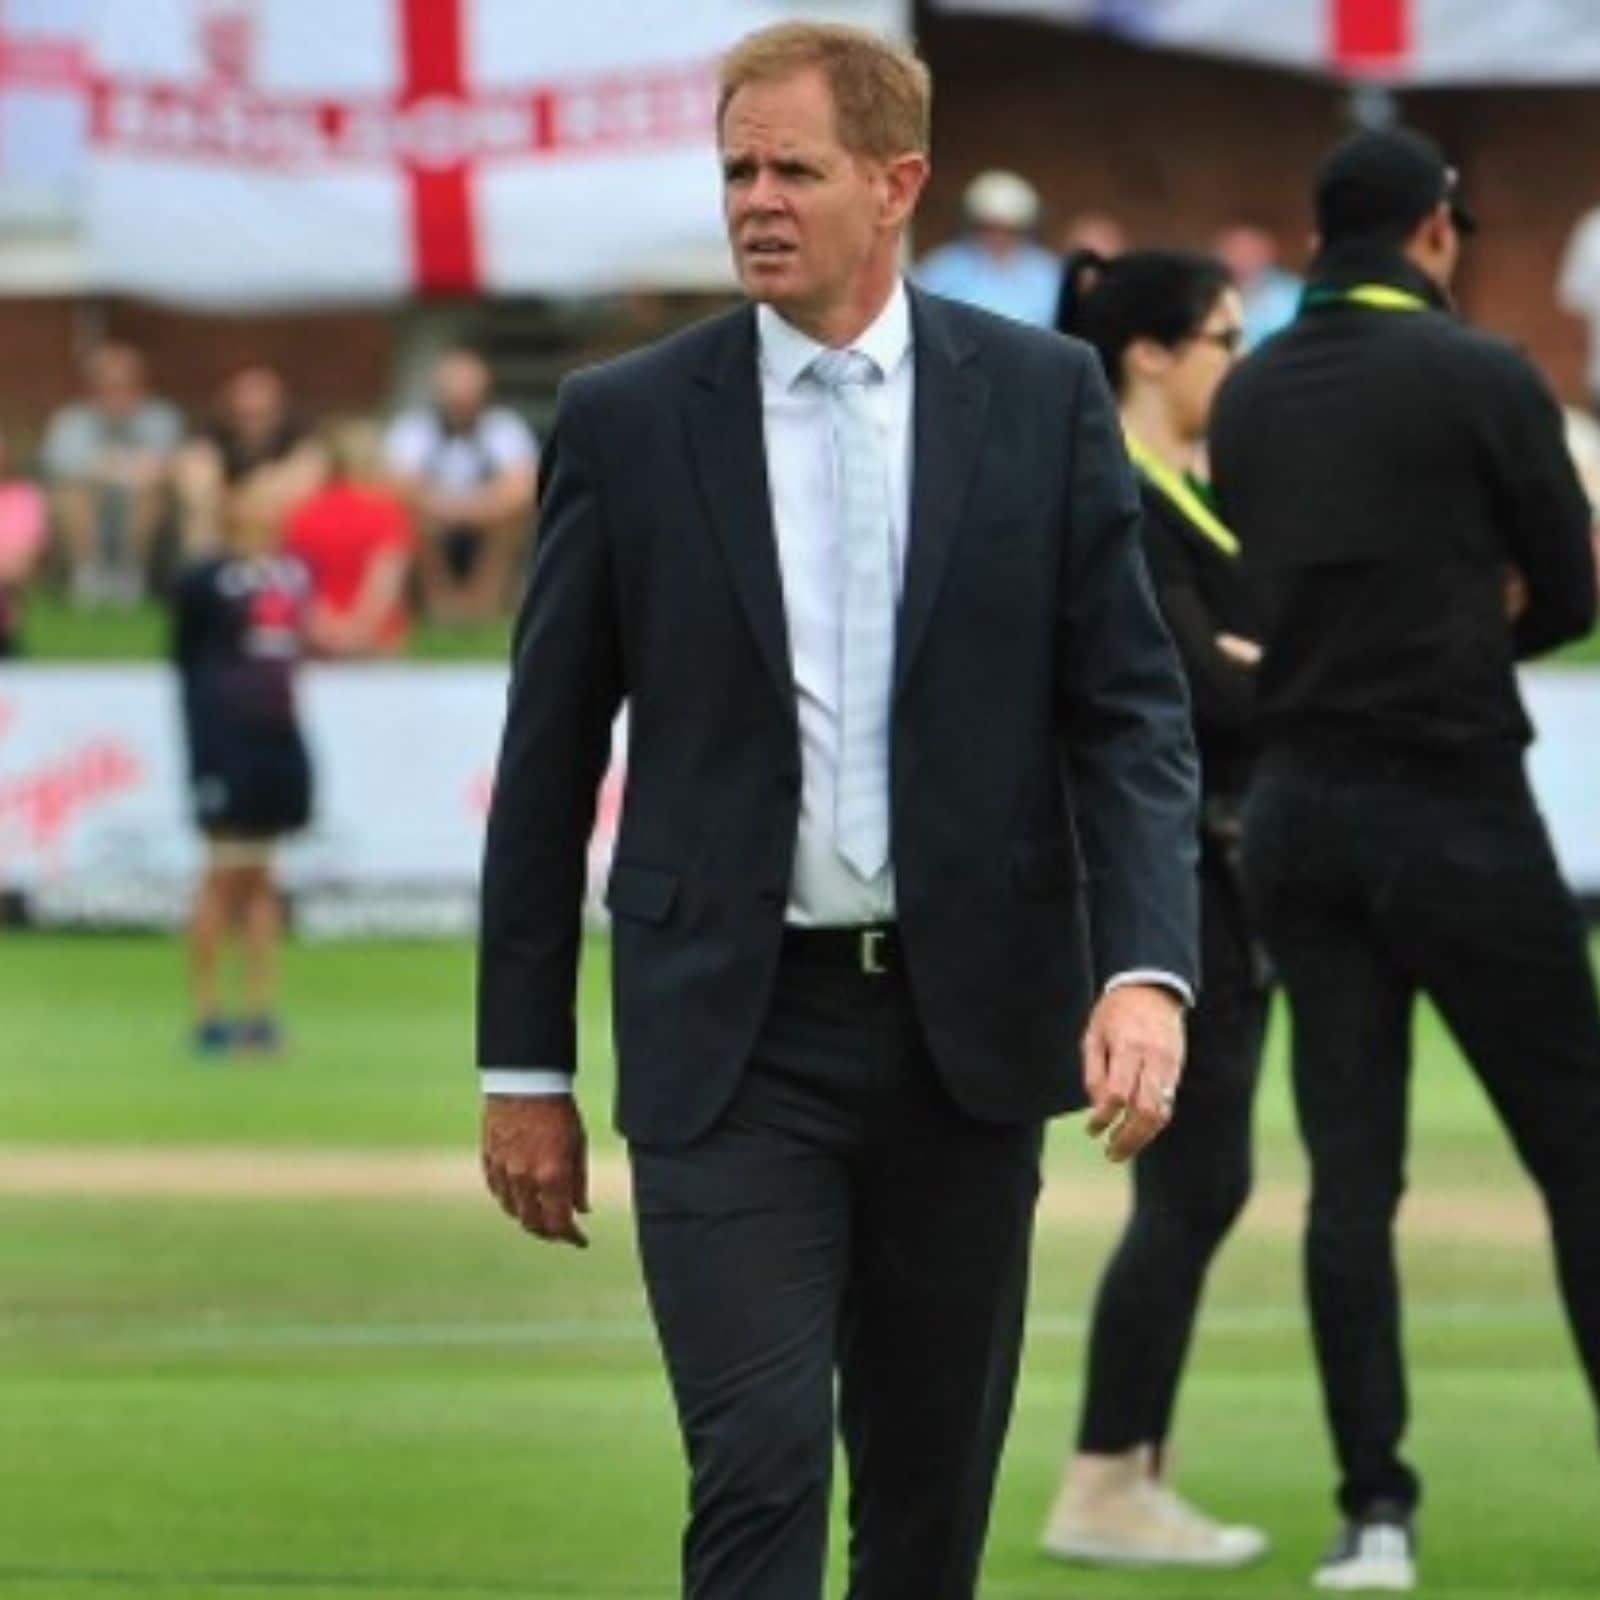 Watch Shaun Pollock rips pants on live TV during South Africa vs Pakistan   Cricket News  The Indian Express